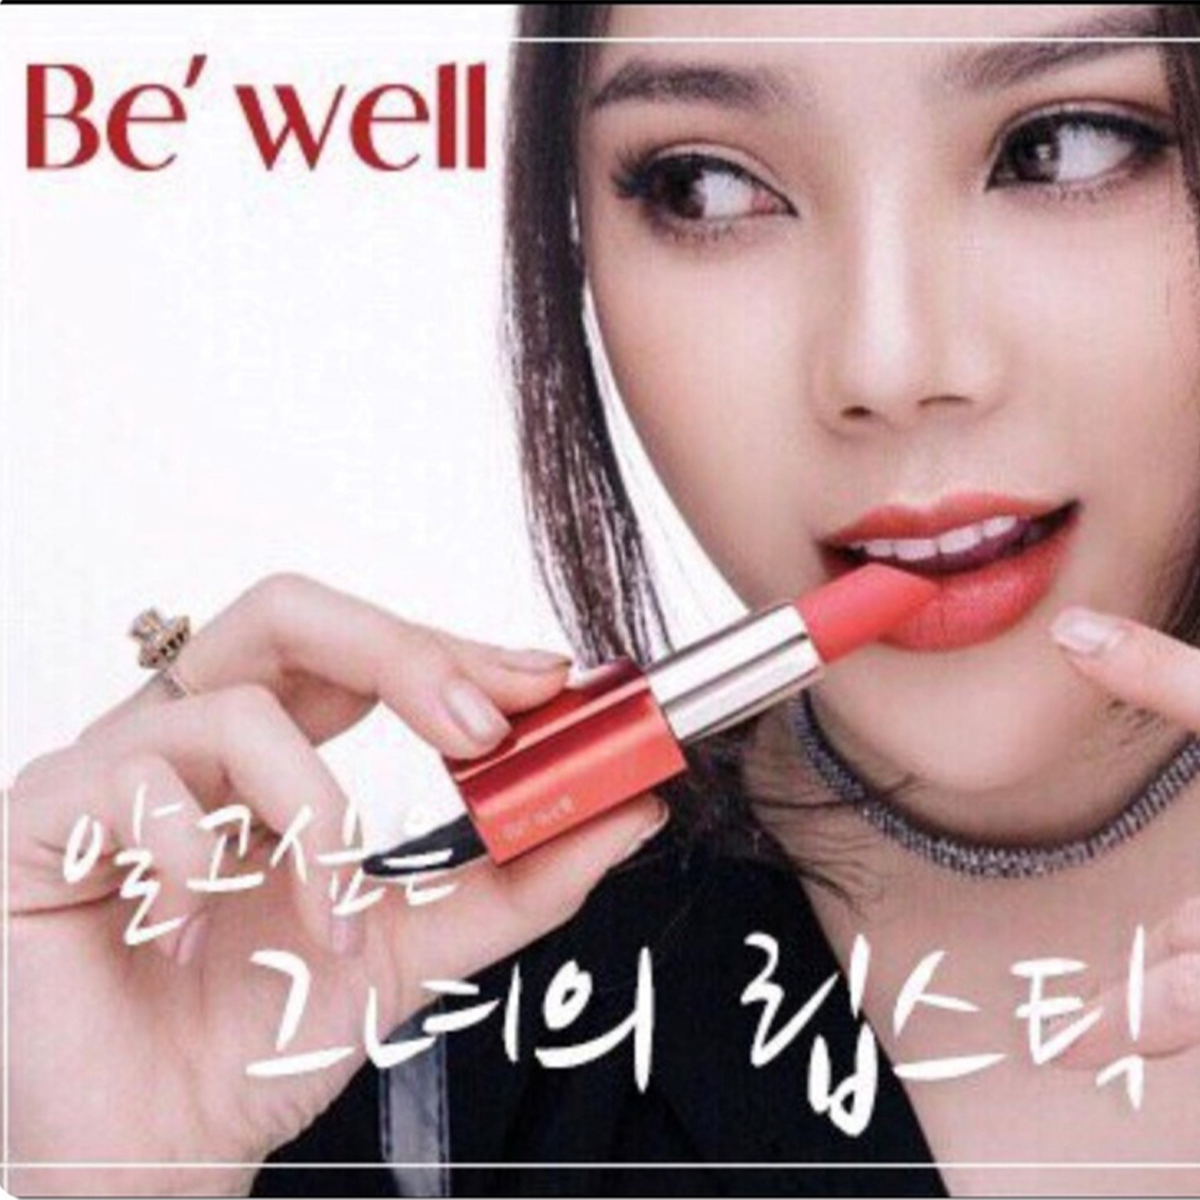 Son thỏi BE'WELL Matte Lip Color [ver02]